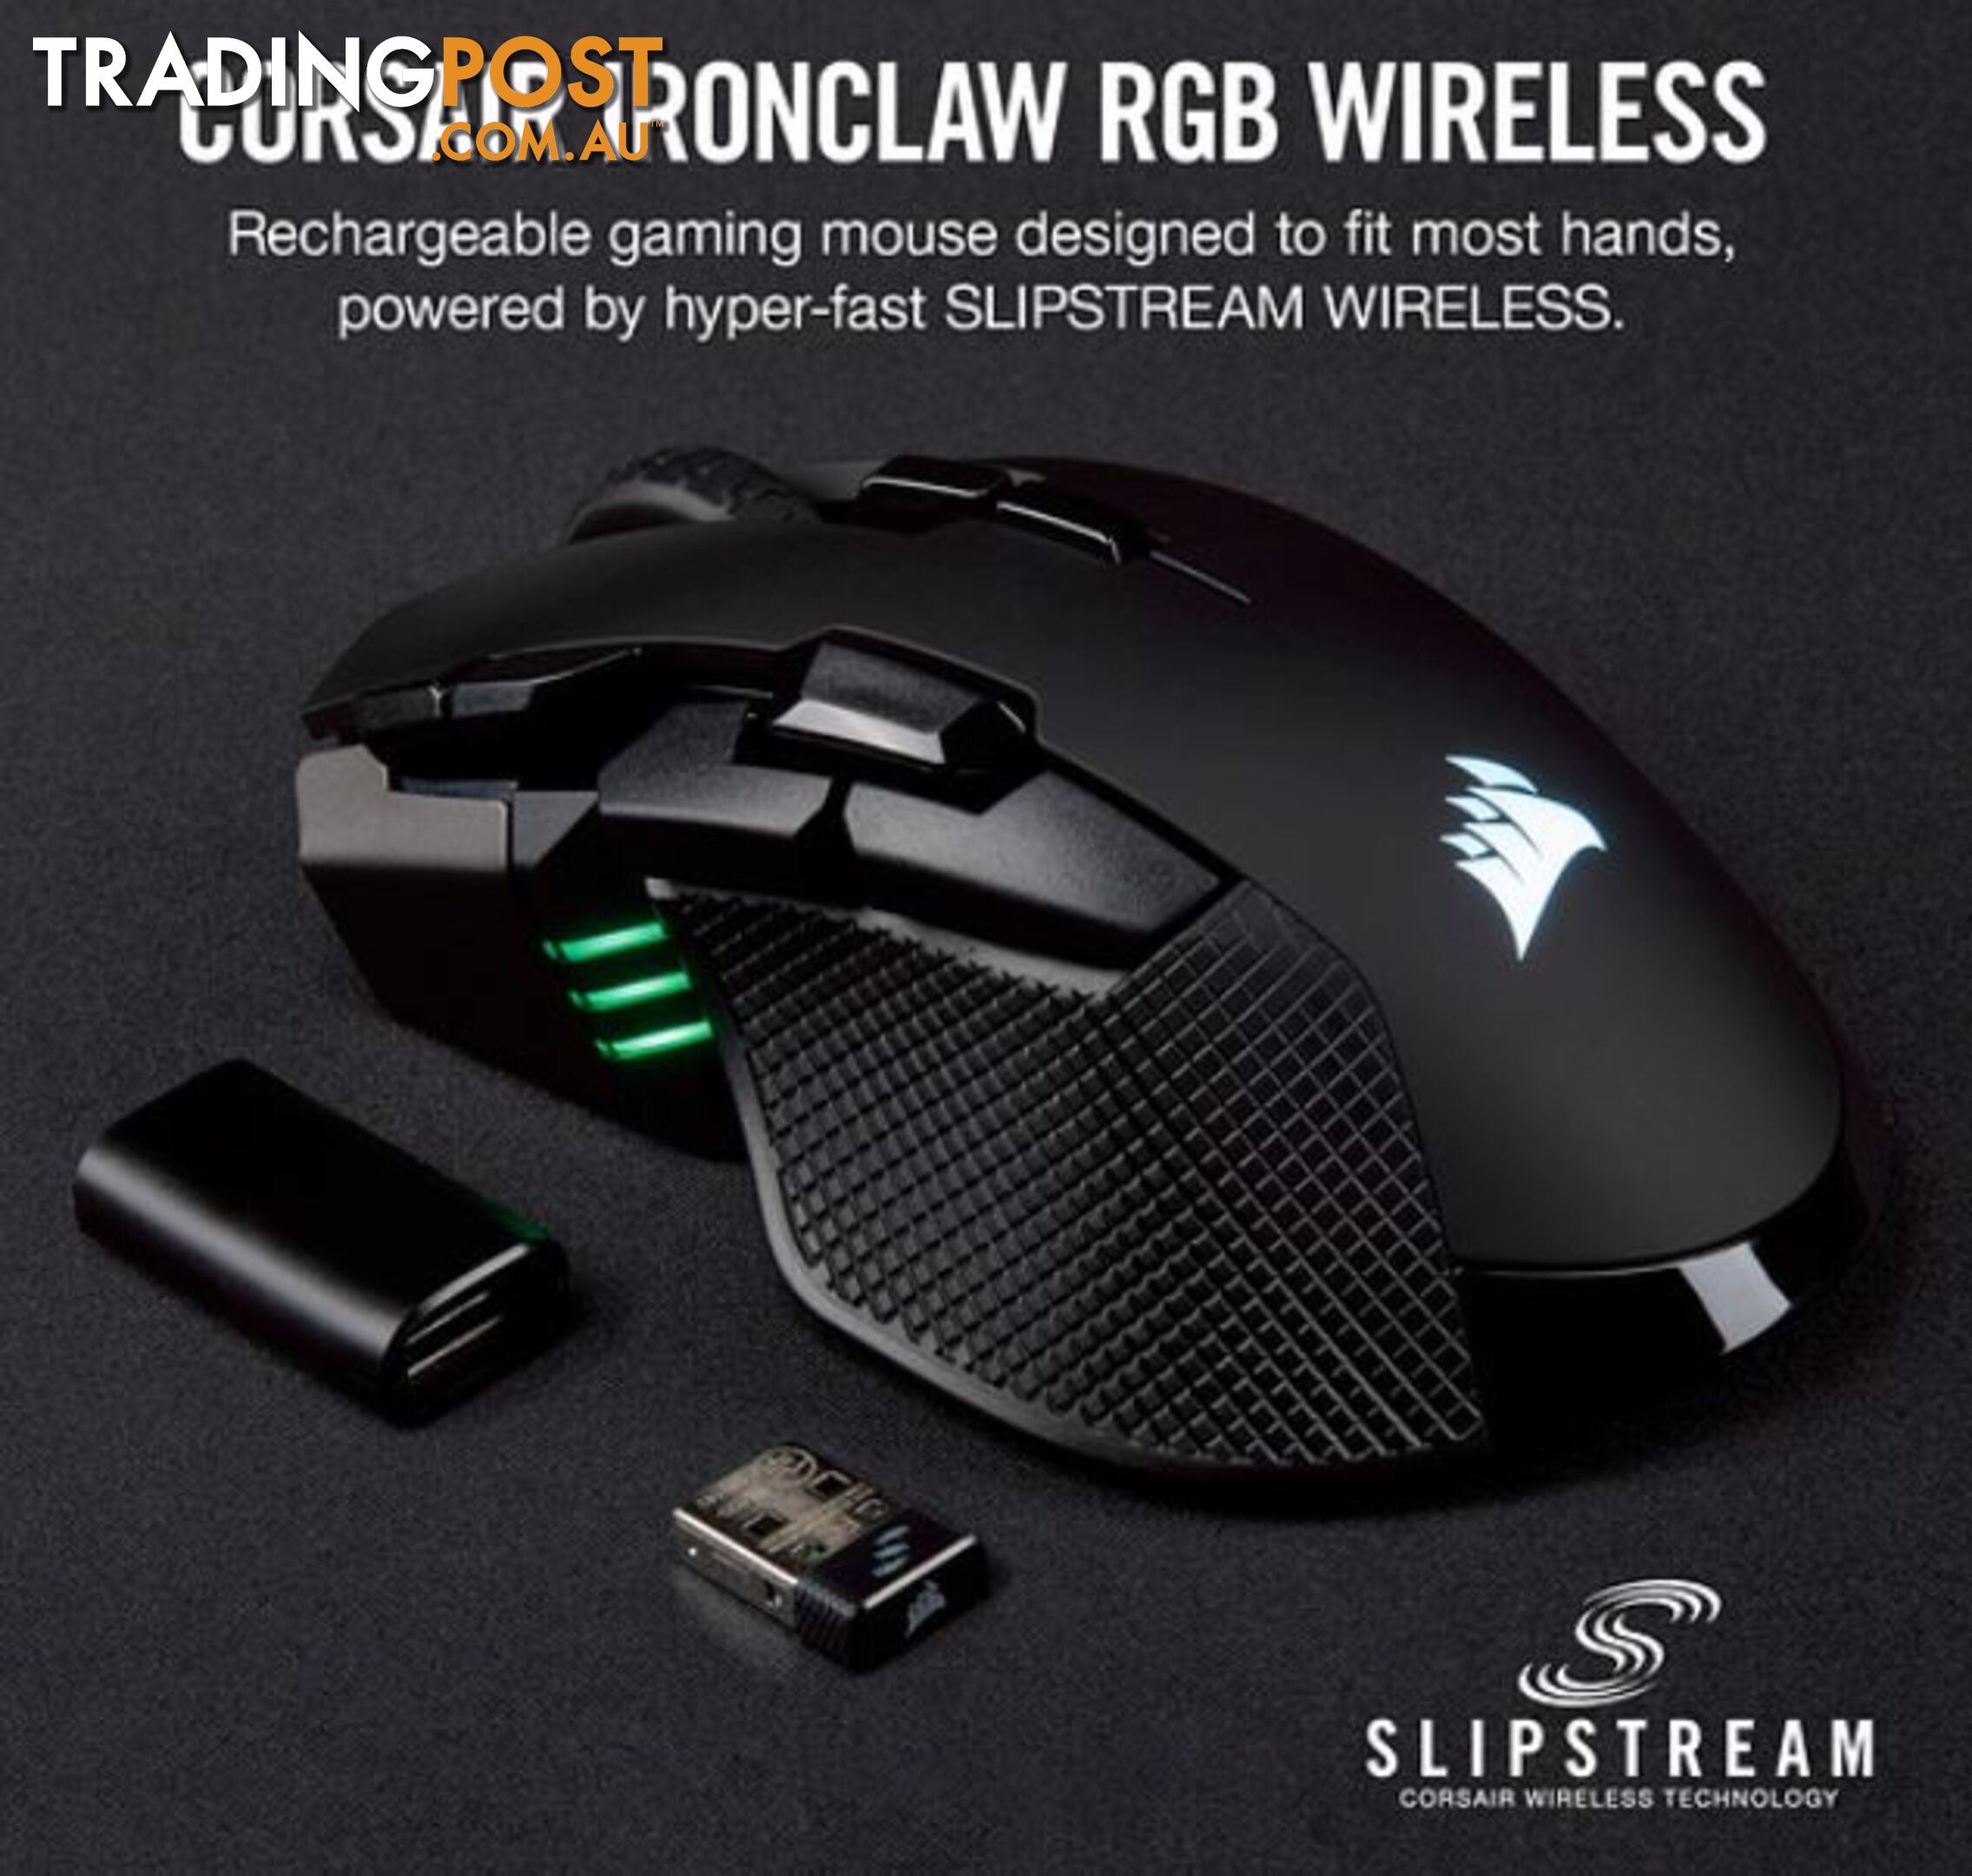 Corsair IRONCLAW RGB Wireless, FPS/MOBA 18,000 DPI, SLIPSTREAM Corsair Wireless Technology Gaming Mouse - MICH-IRONCLAW-BKWL